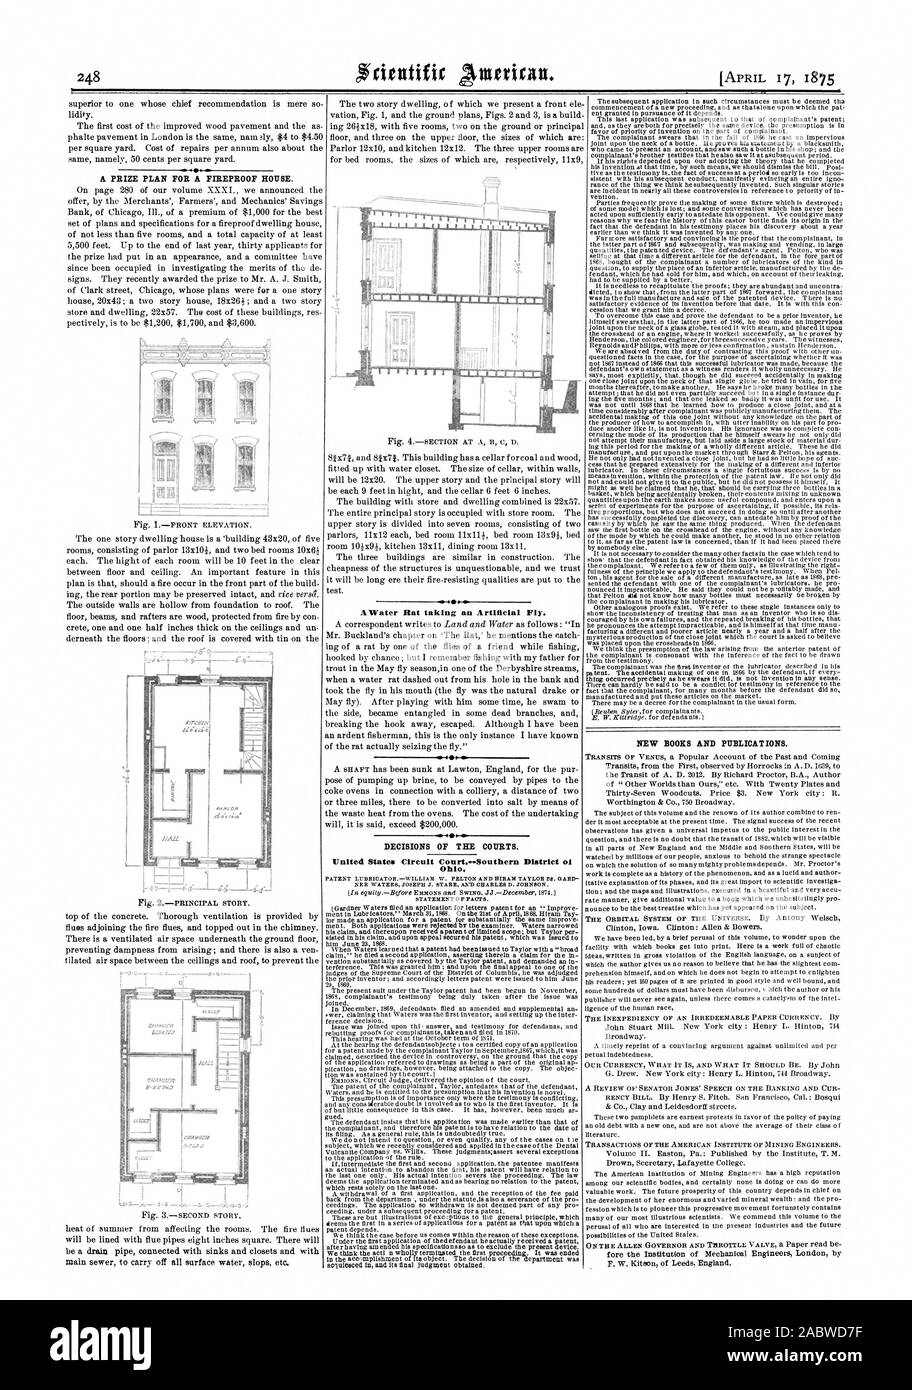 A PRIZE PLAN FOR A FIREPROOF HOUSE. 4o AWater Rat taking an Artificial Fly. DECISIONS OF THE COURTS. United States Circuit Court.--Southern District 01 Ohio. NEW BOOKS AND PUBLICATIONS., scientific american, 1875-04-17 Stock Photo